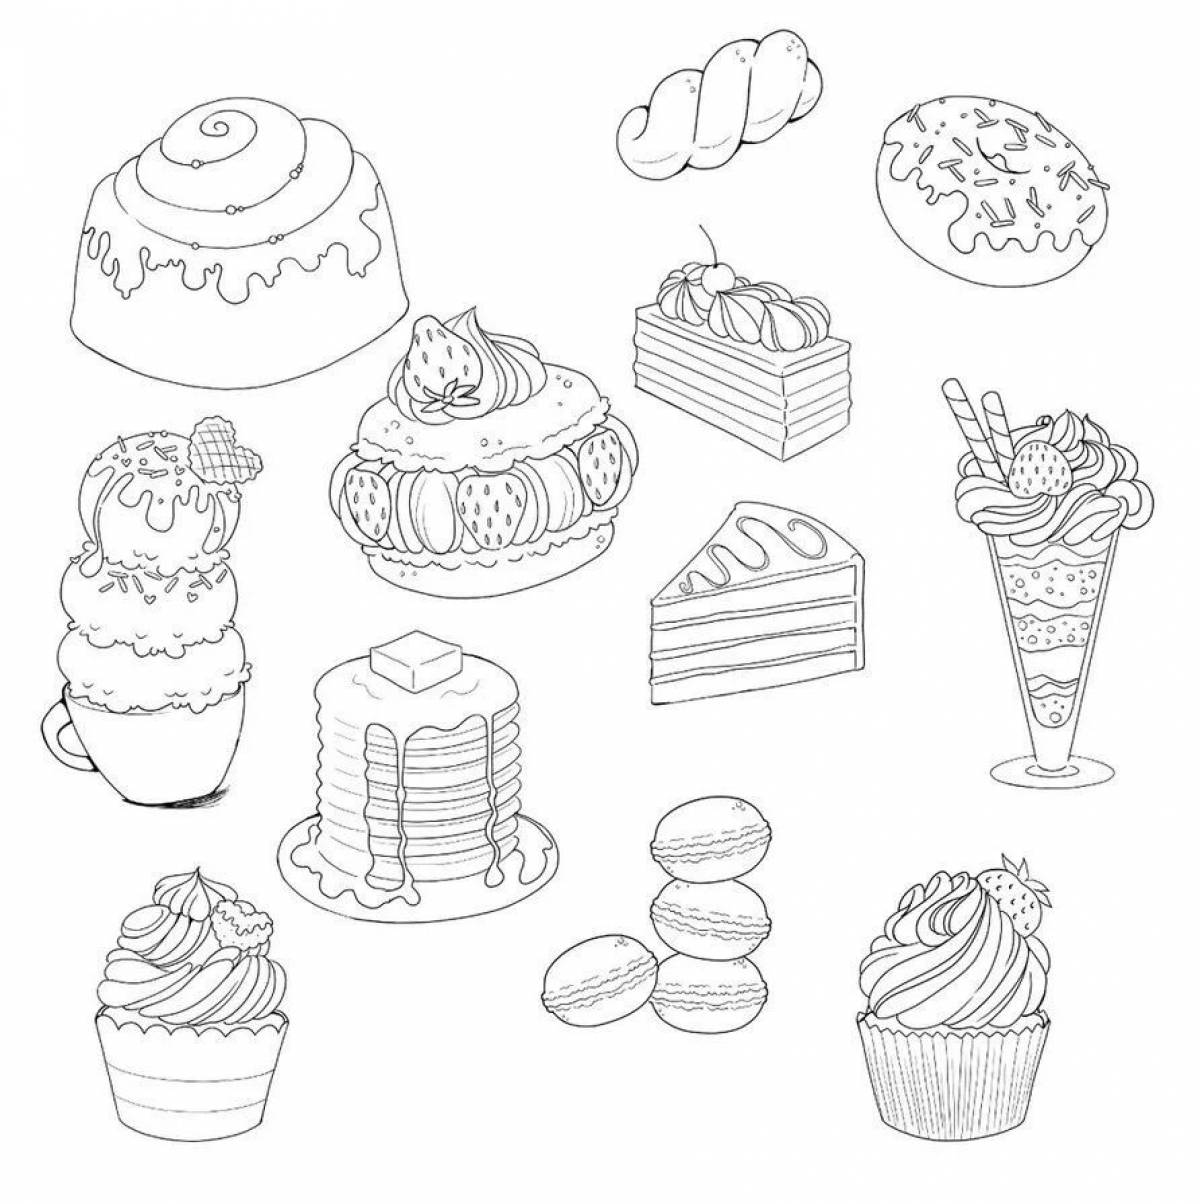 Bakery color-explosion coloring page